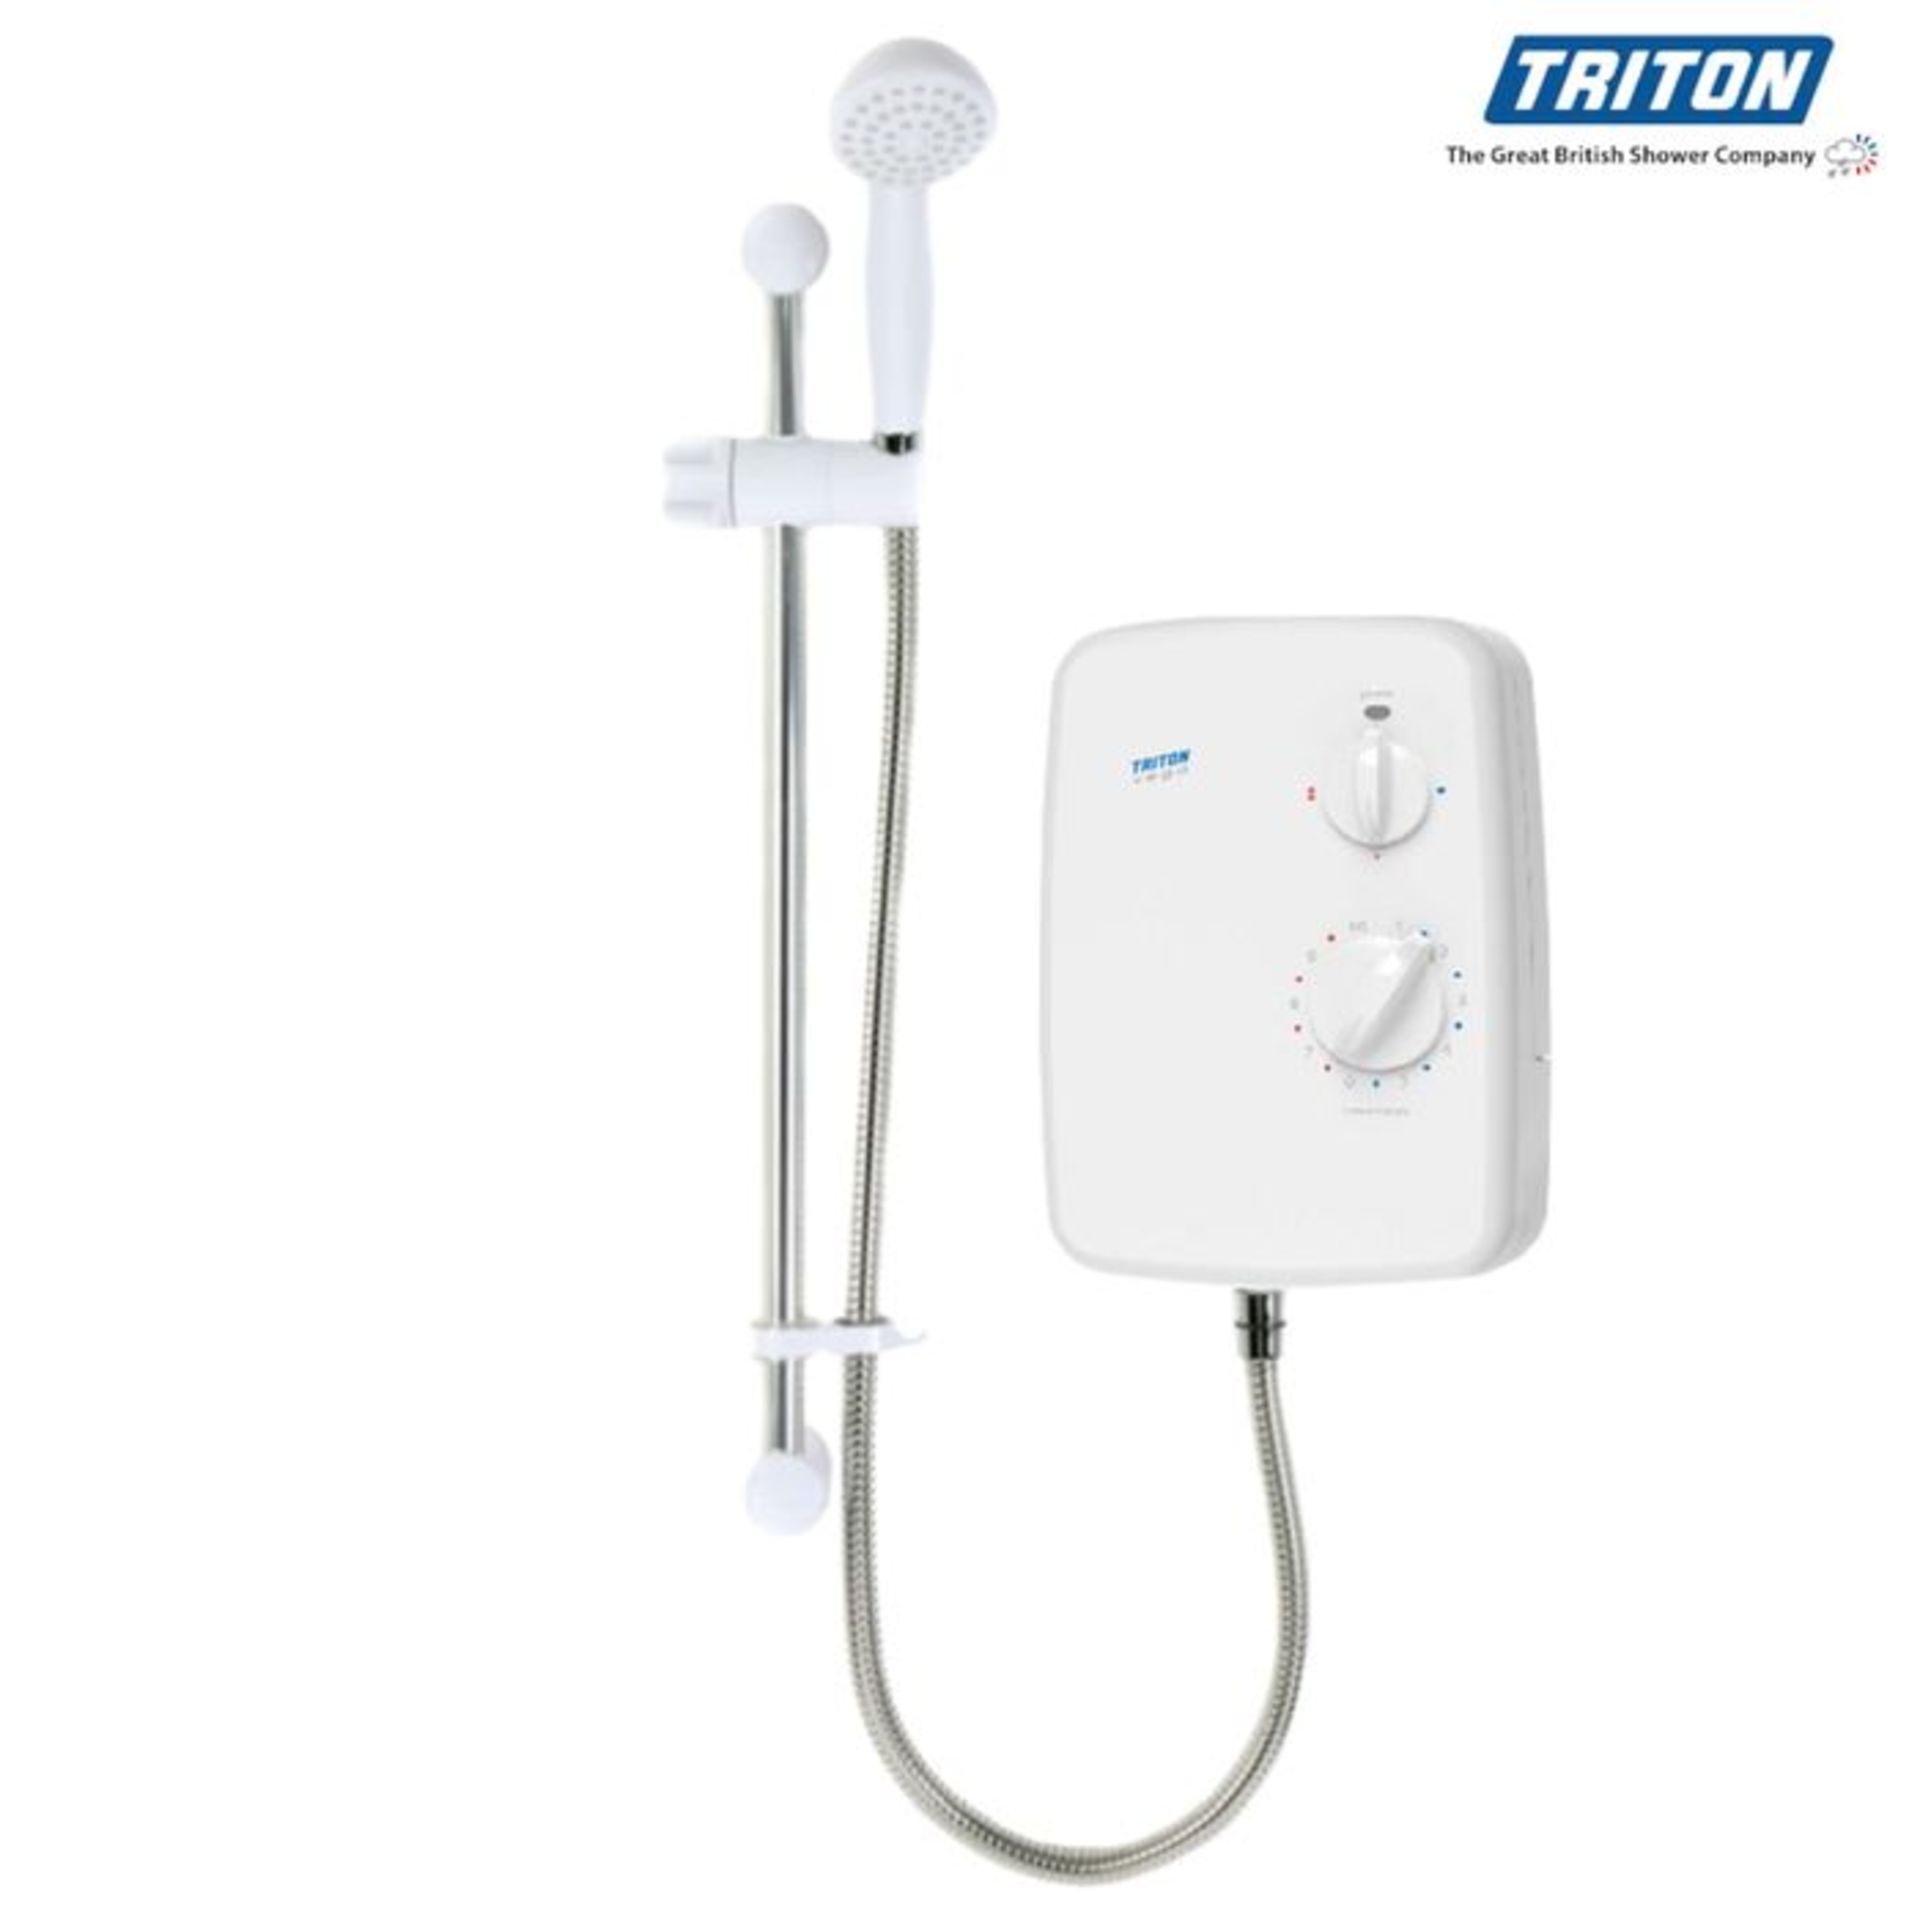 (A213) 8.5kW Triton Vega Electric Shower. RRP £529.99. Compatible with virtually any household... - Image 3 of 3